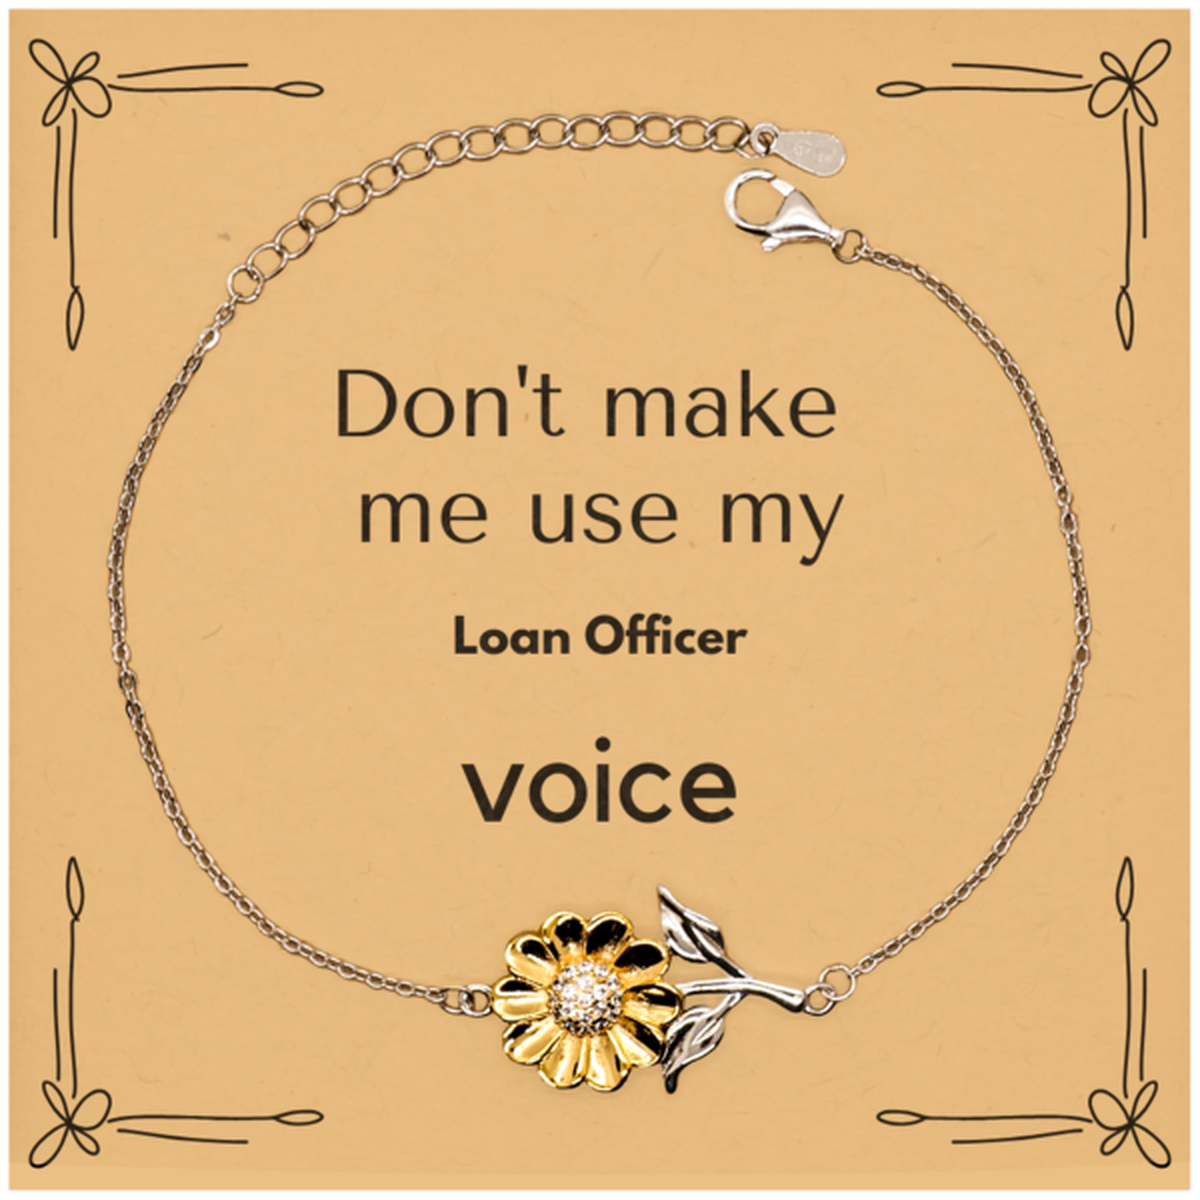 Don't make me use my Loan Officer voice, Sarcasm Loan Officer Card Gifts, Christmas Loan Officer Sunflower Bracelet Birthday Unique Gifts For Loan Officer Coworkers, Men, Women, Colleague, Friends